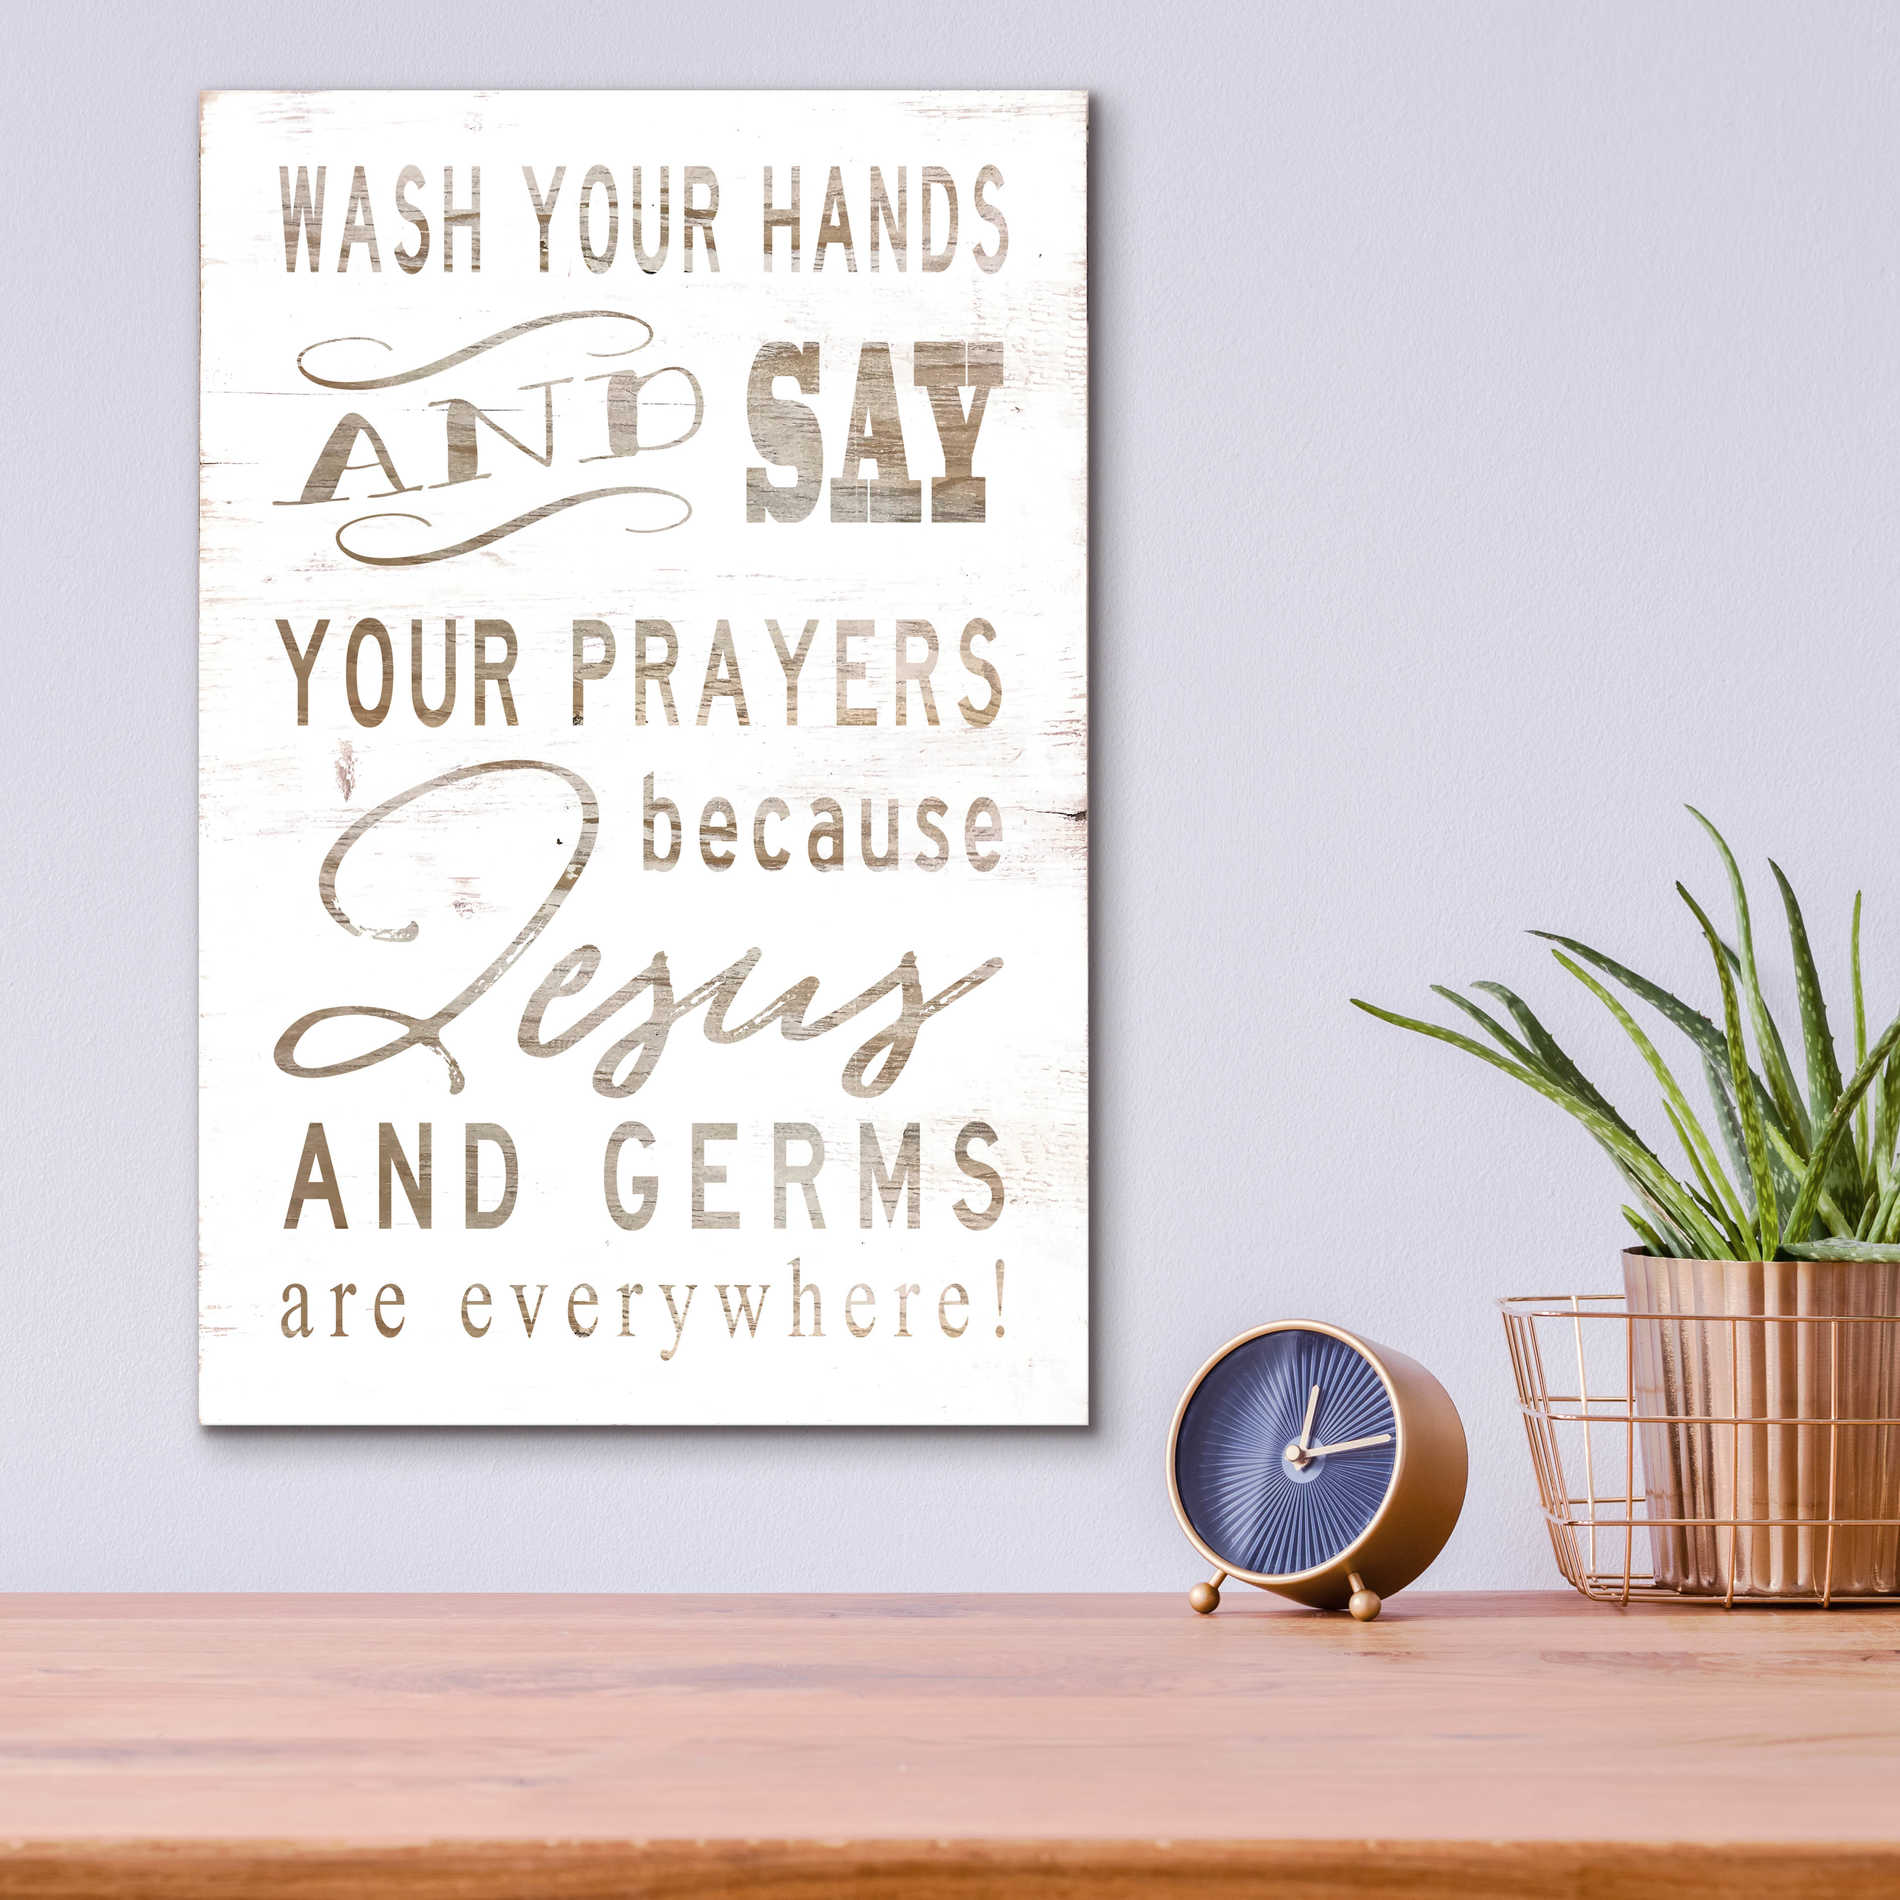 Epic Art 'Wash Your Hands' by Cindy Jacobs, Acrylic Glass Wall Art,12x16